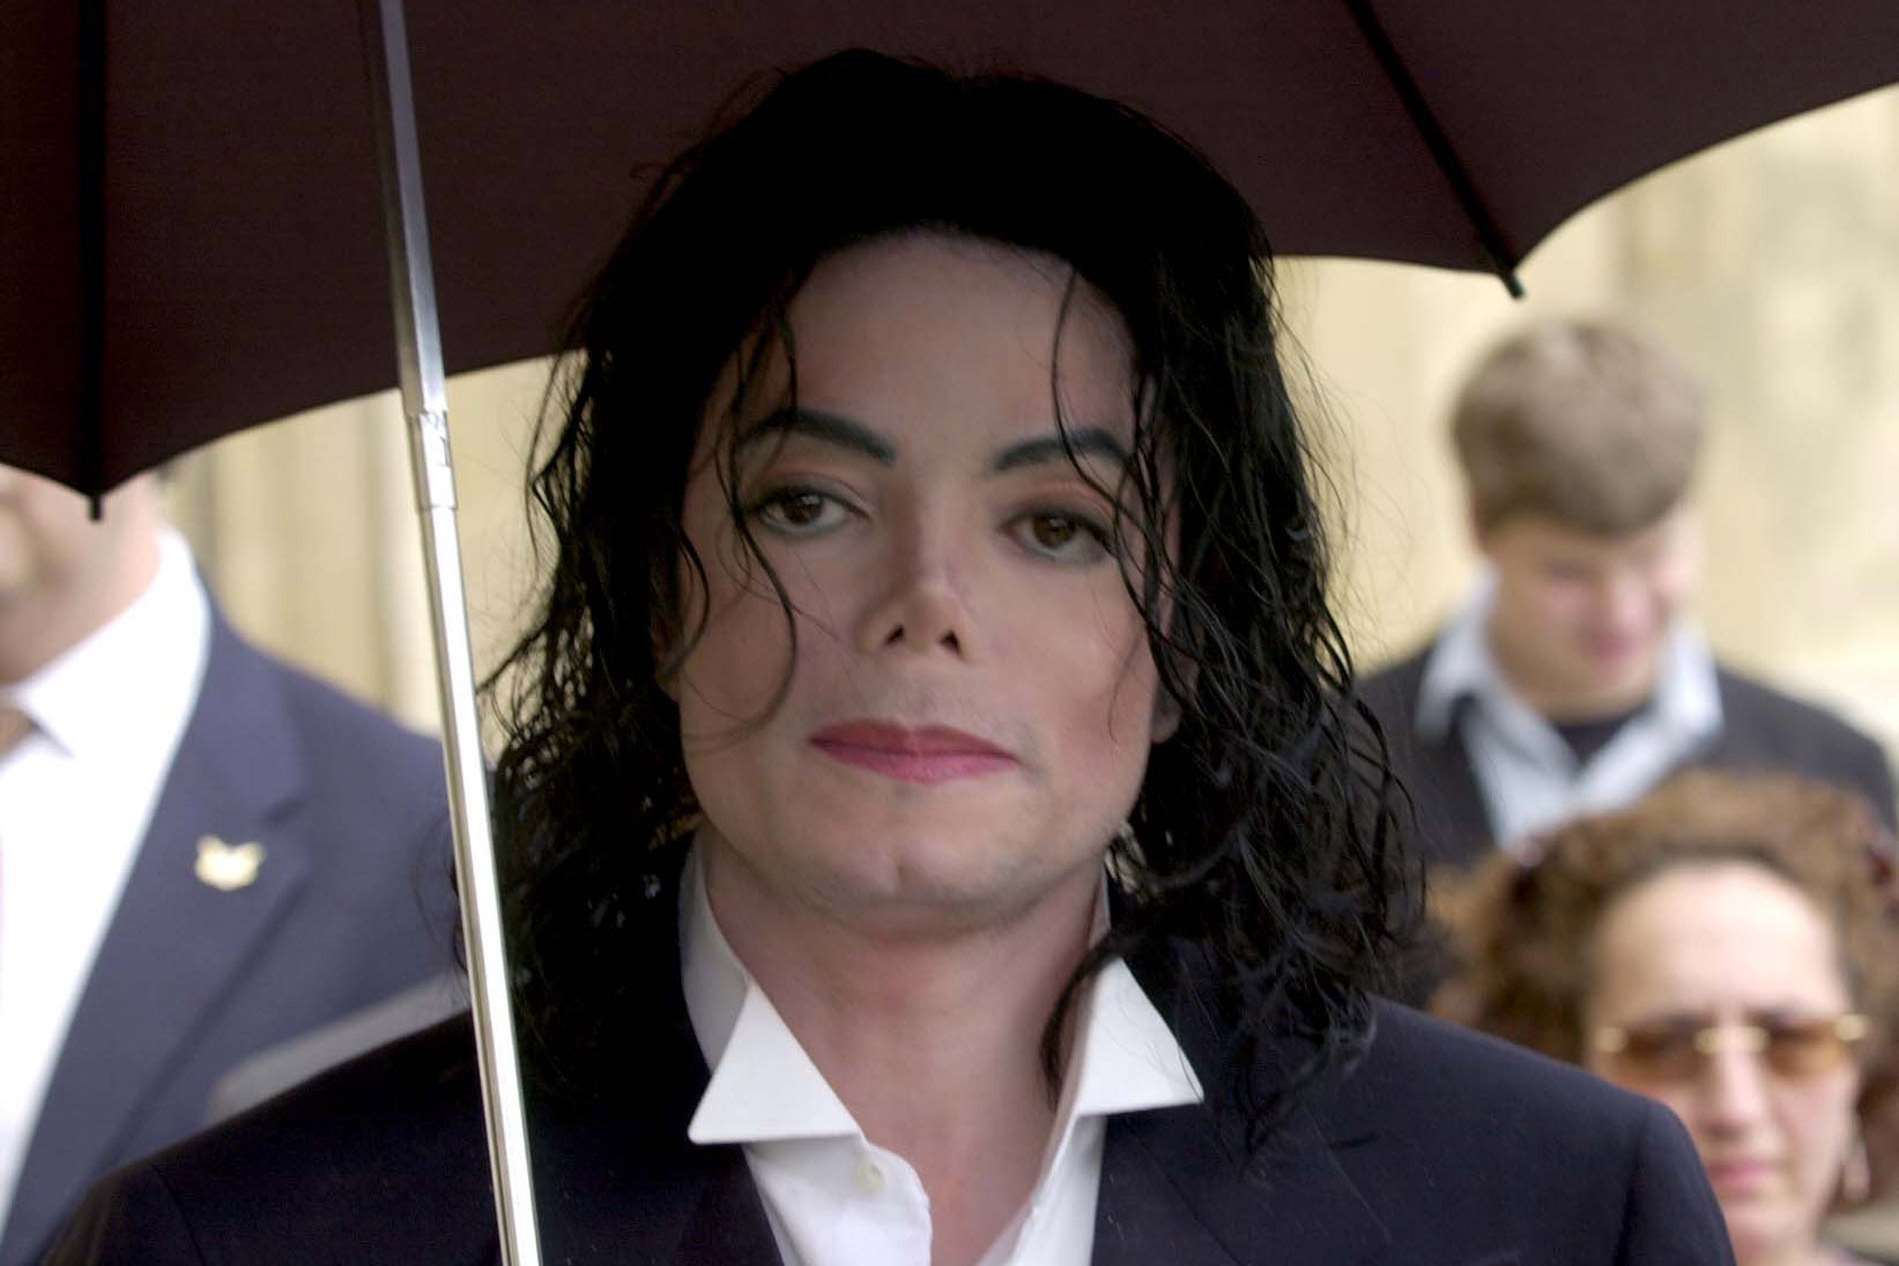 Michael Jackson is the top-earning dead celebrity, with earnings of $825m last year